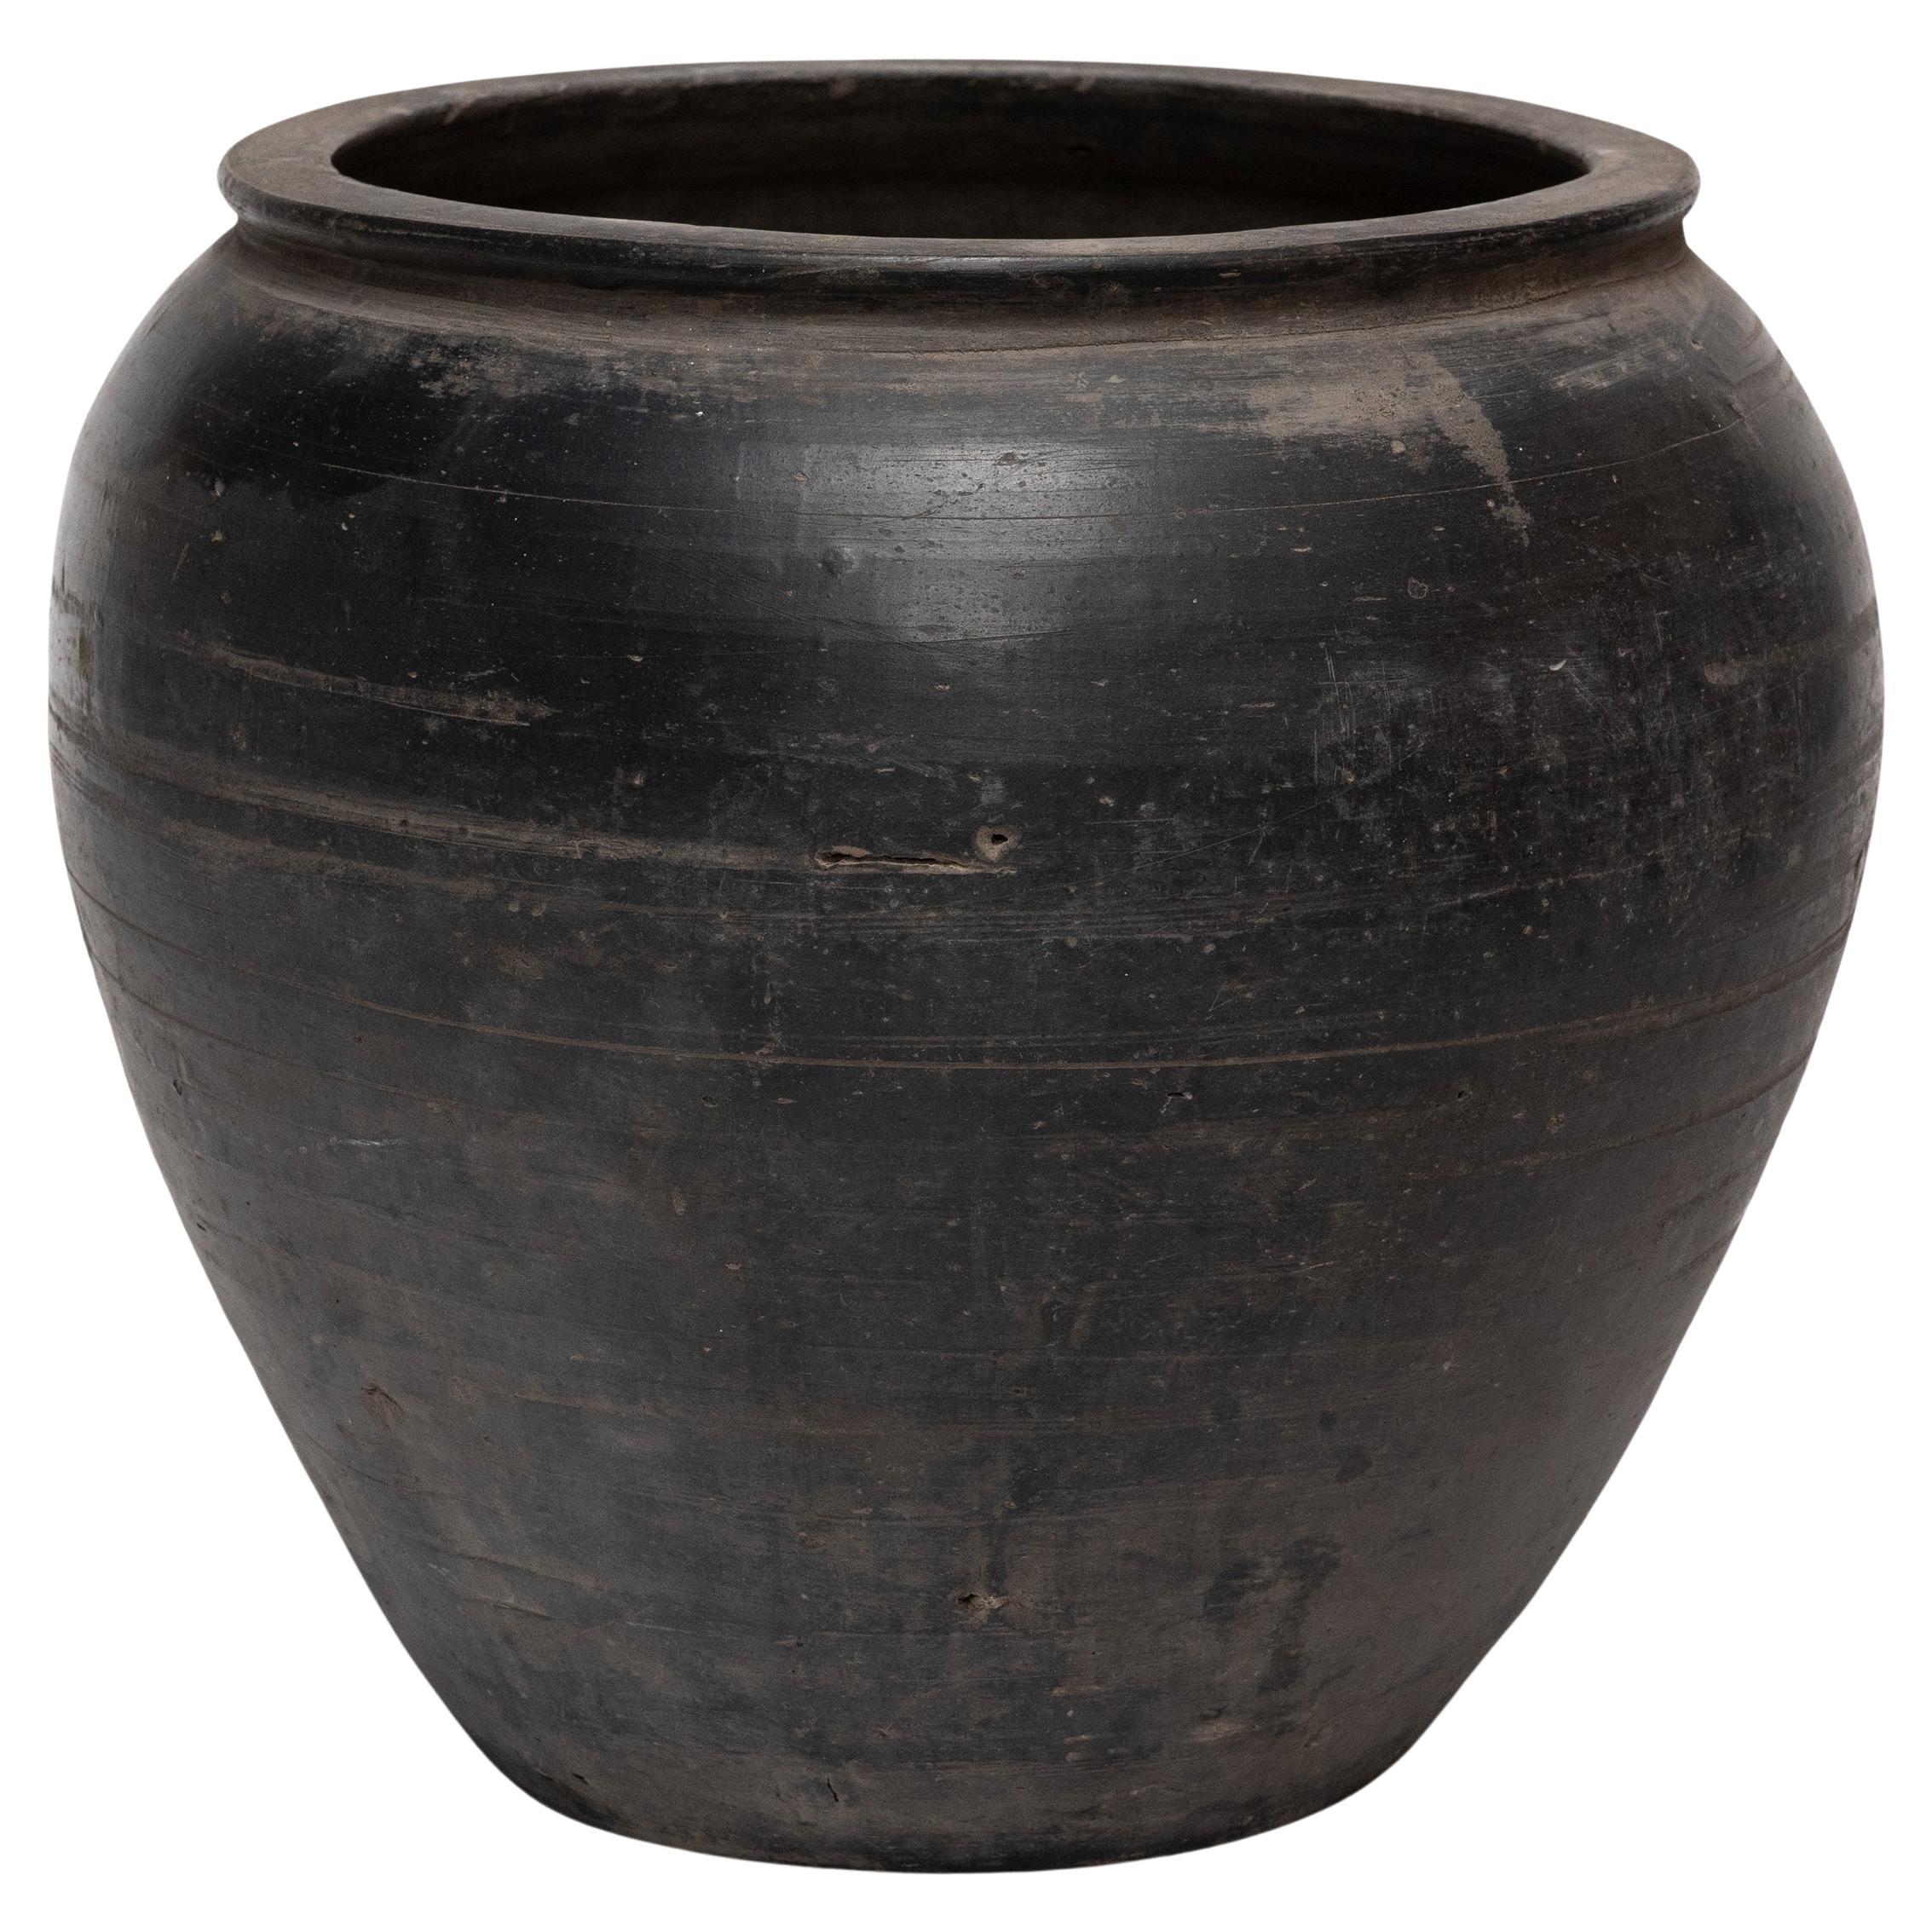 Chinese Provincial Earthenware Vessel, c. 1900